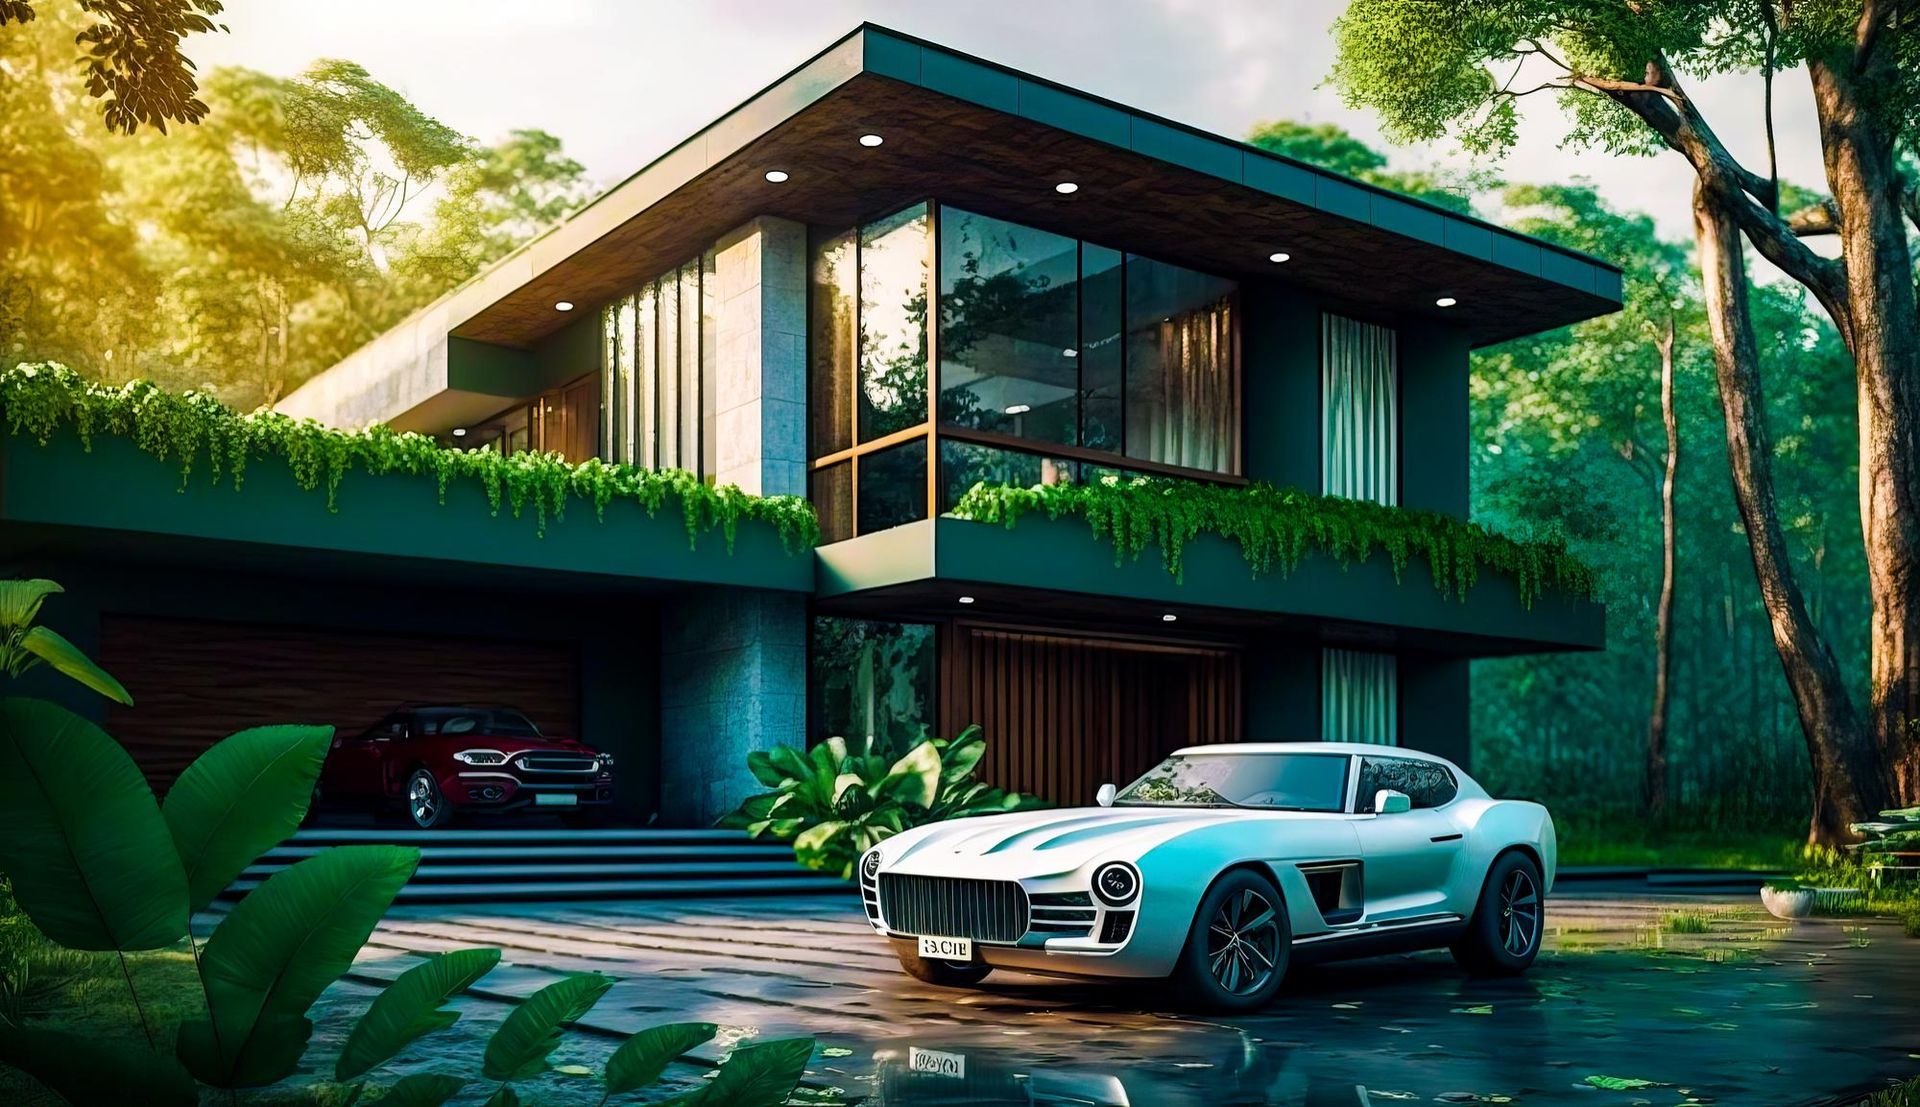 A car is parked in front of a modern house surrounded by trees.